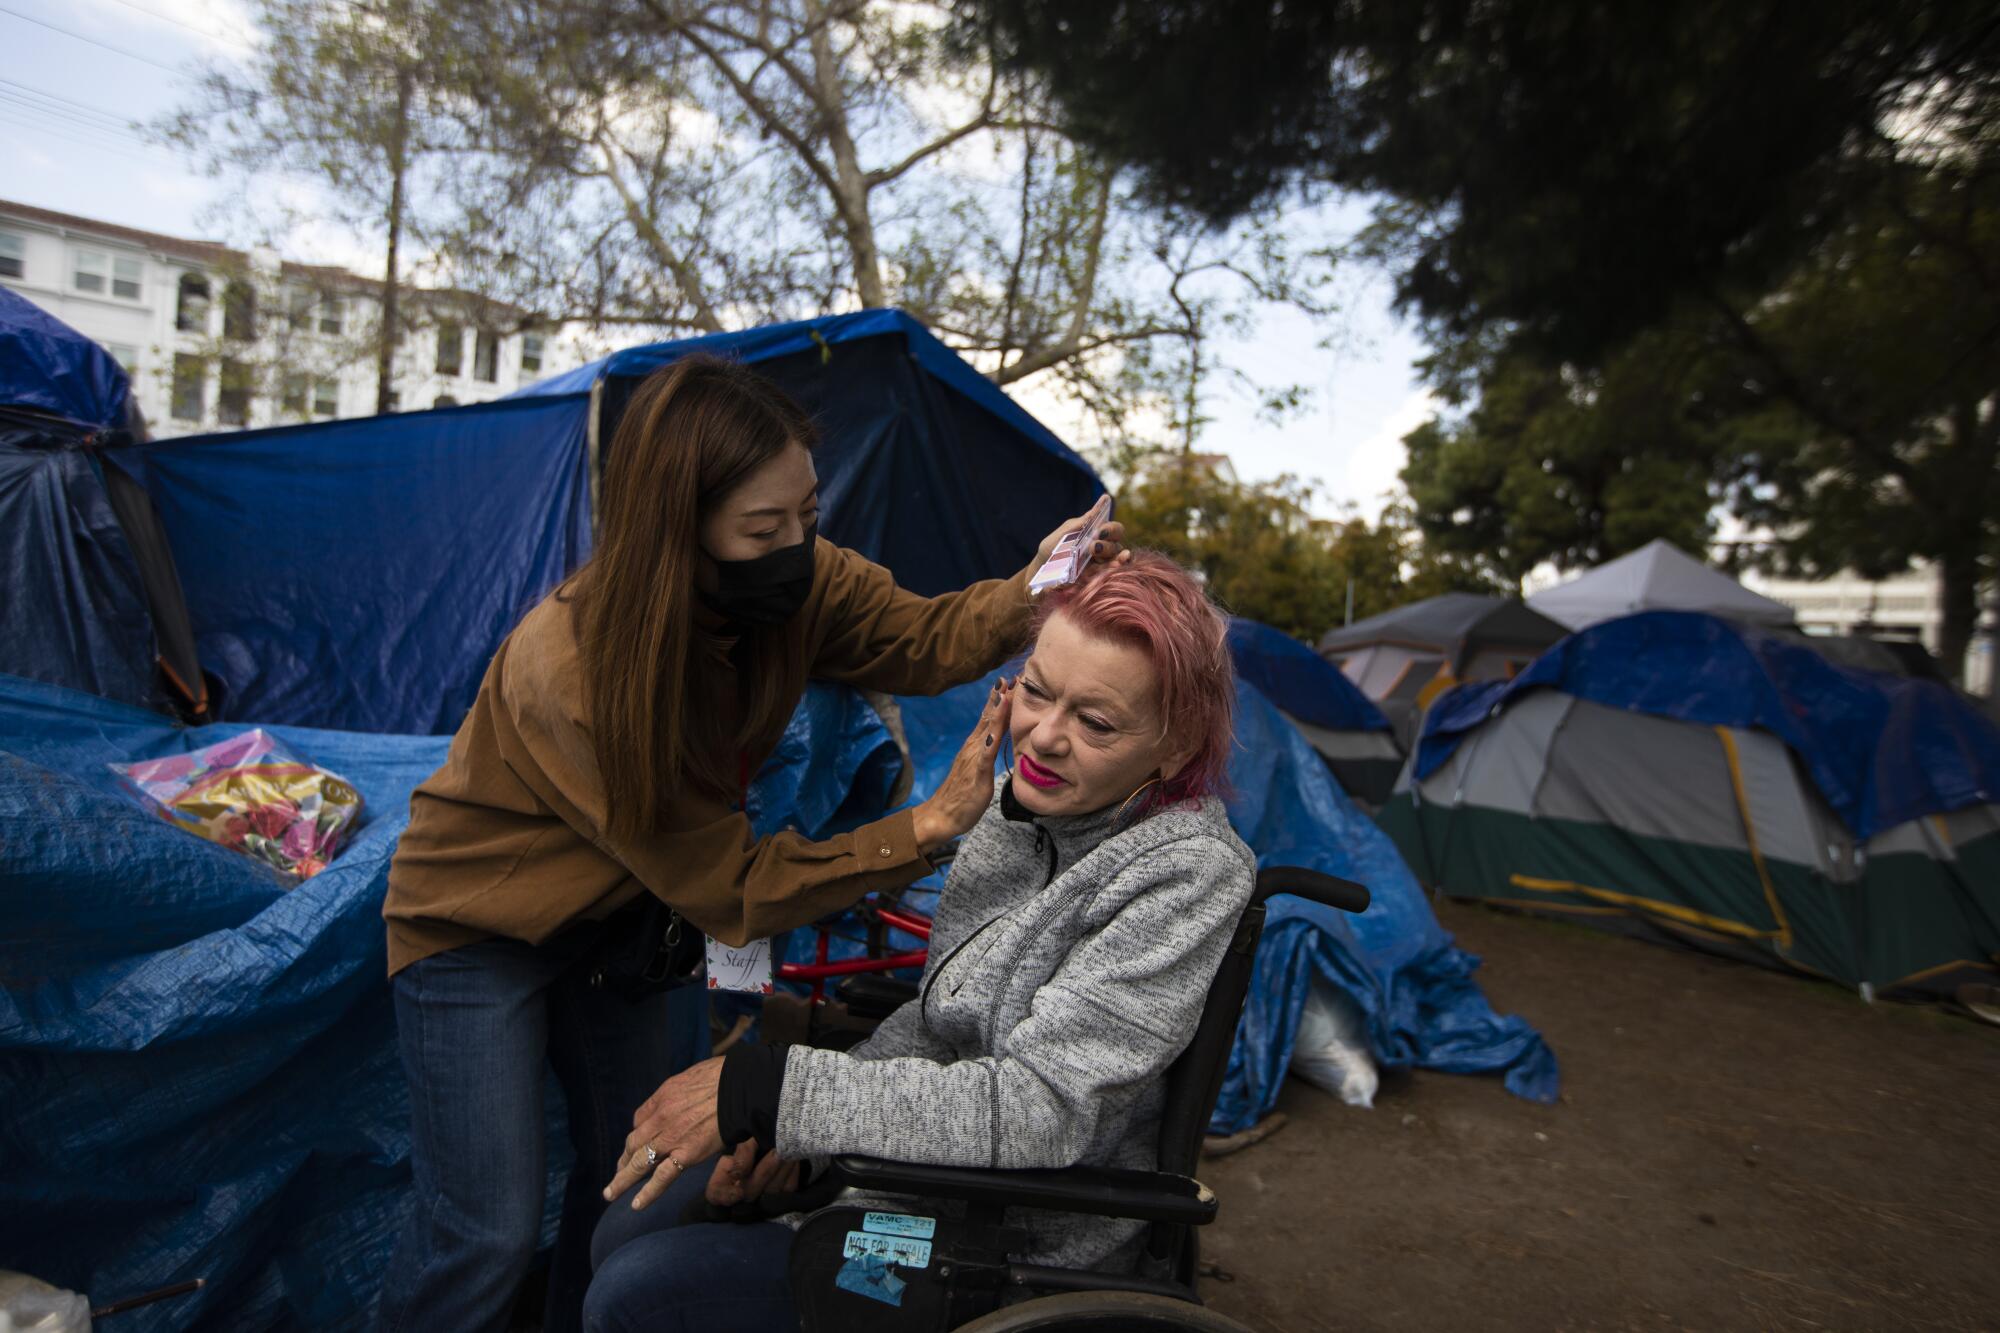 Amie Roe, with Wilderness International Church, left, helps Valerie Zeller with her makeup.